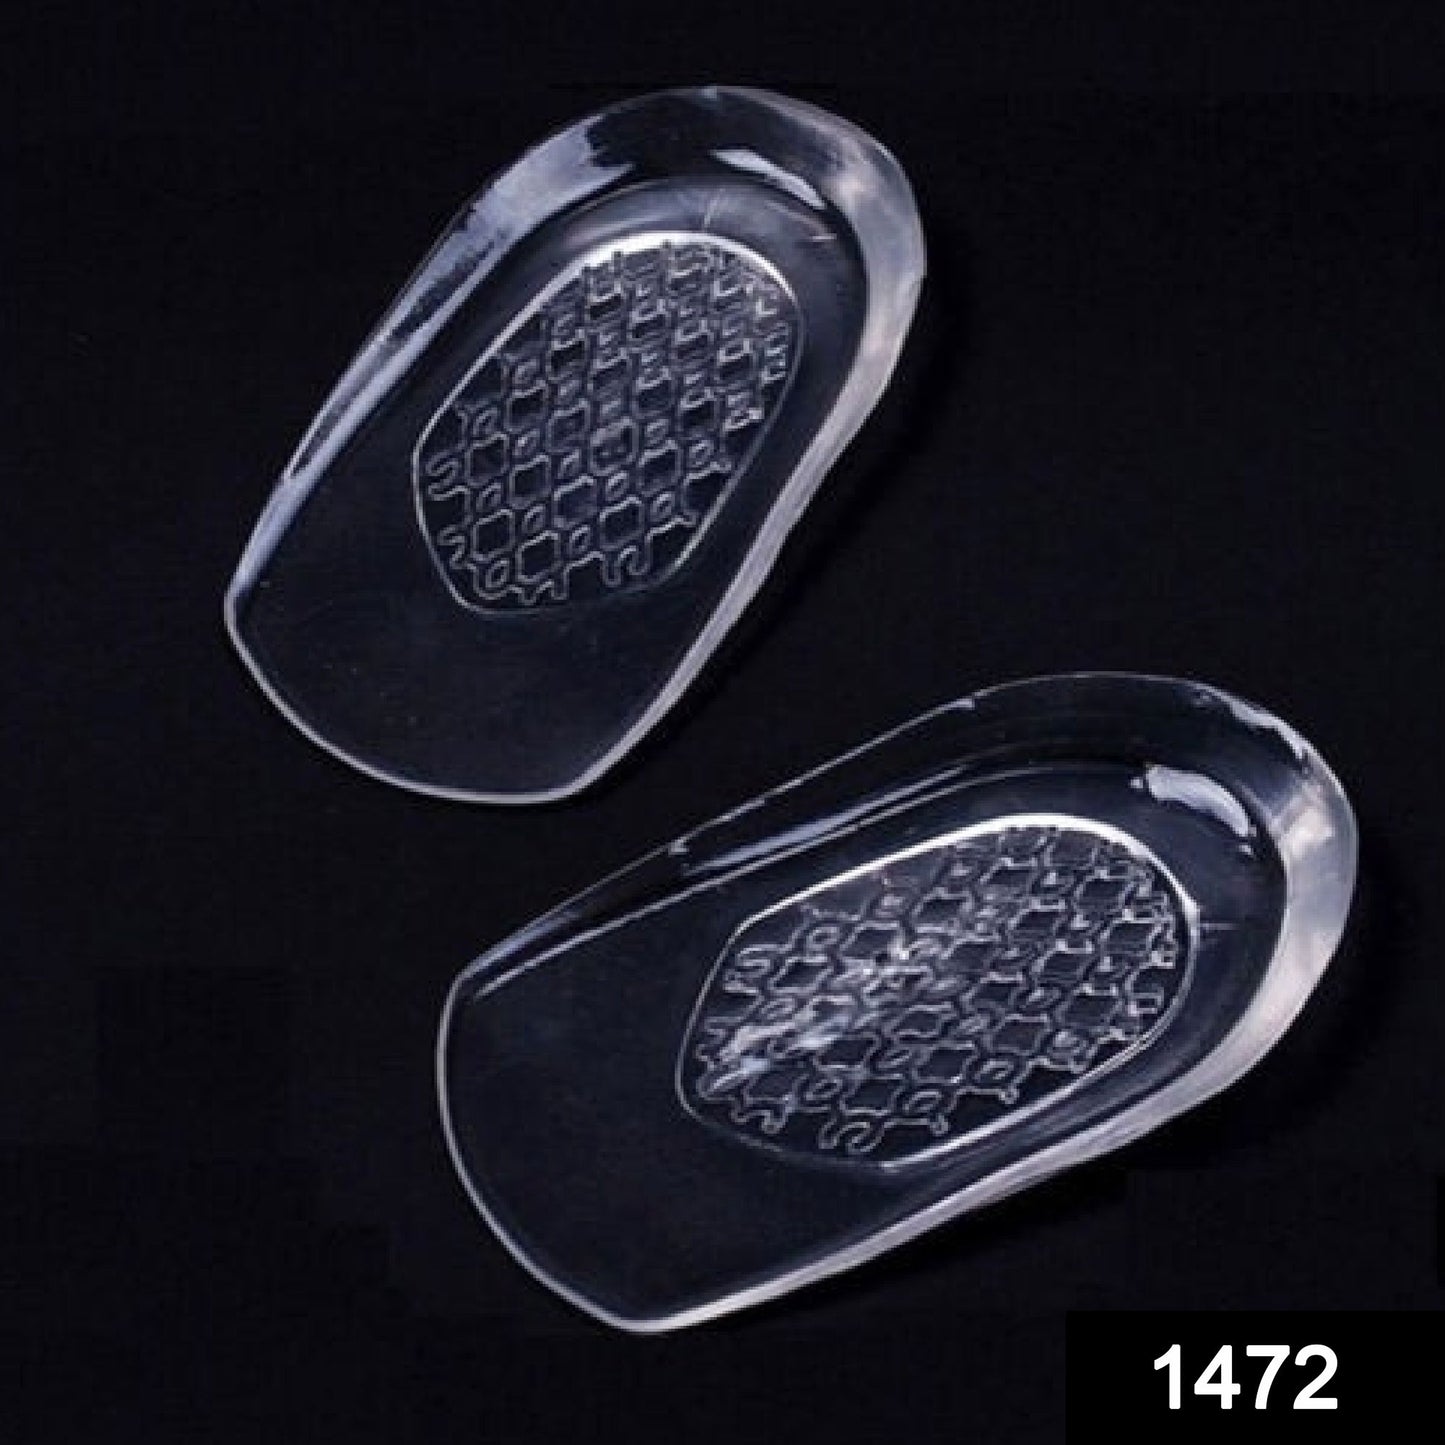 1472 Silicone Gel Heel Pad Protector Insole Cups for Heel Swelling Pain Relief DeoDap